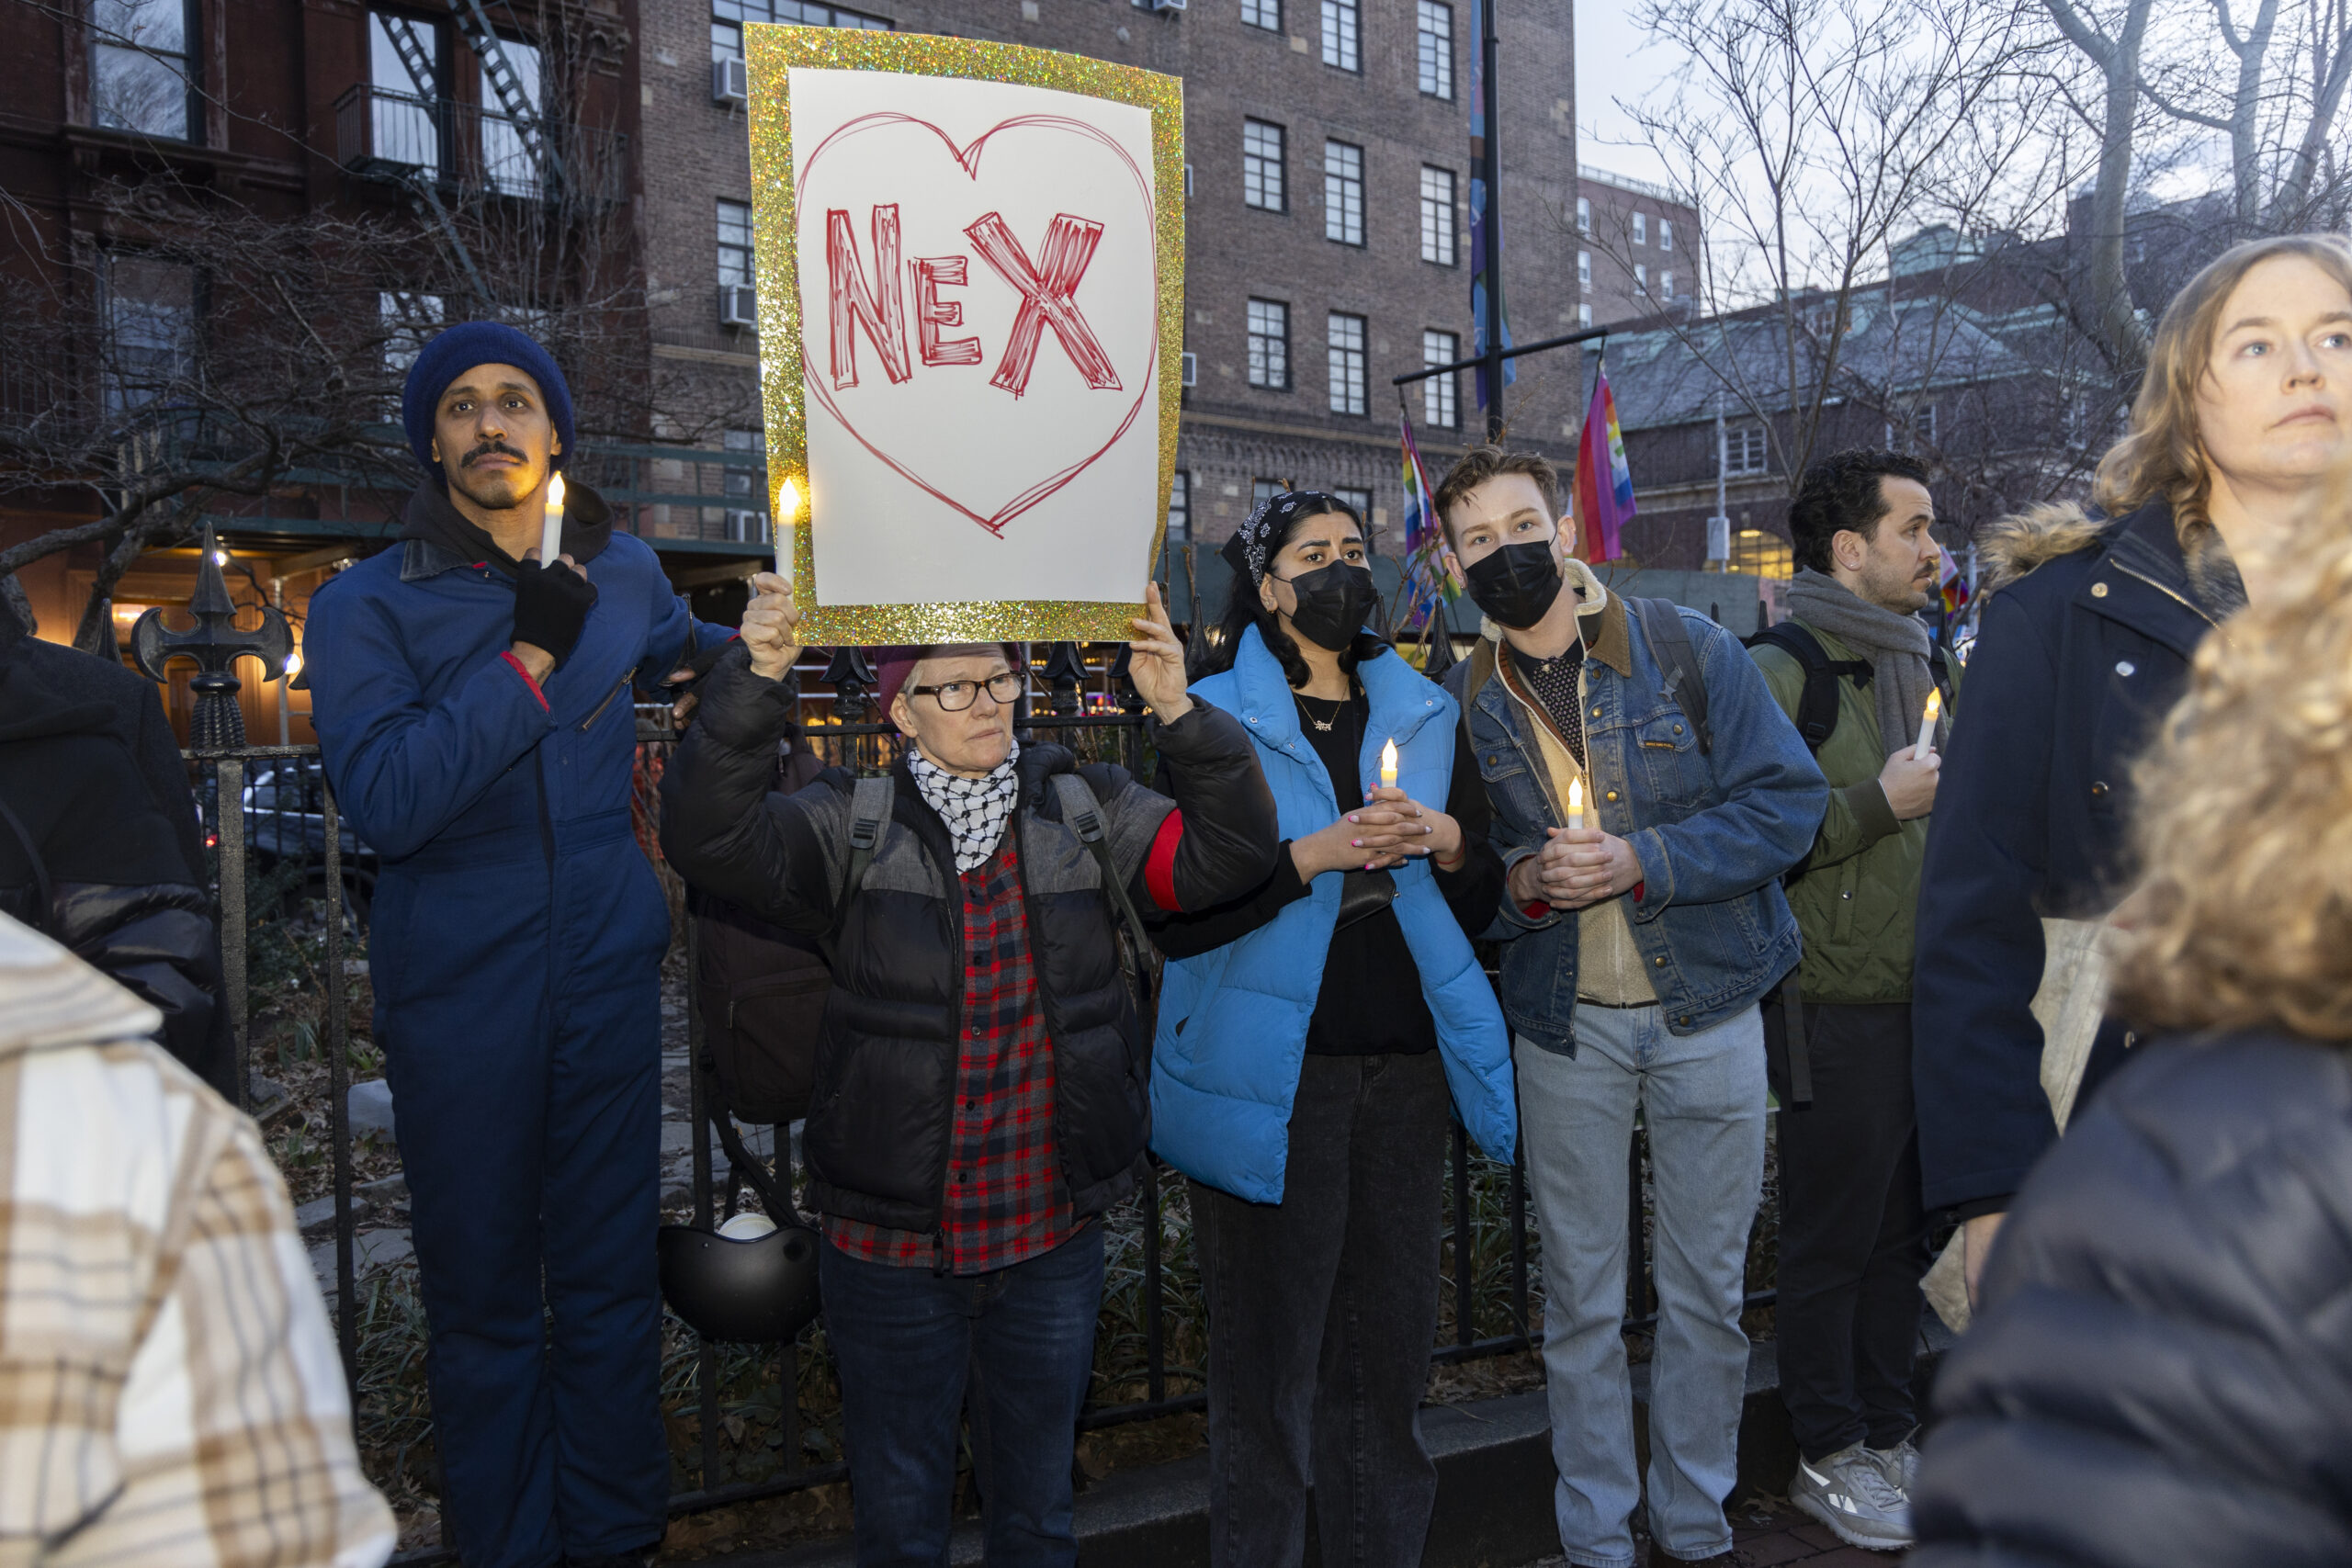 Person holds a sign that reads “NEX” with a heart drawn around it. Around them are others holding candles.